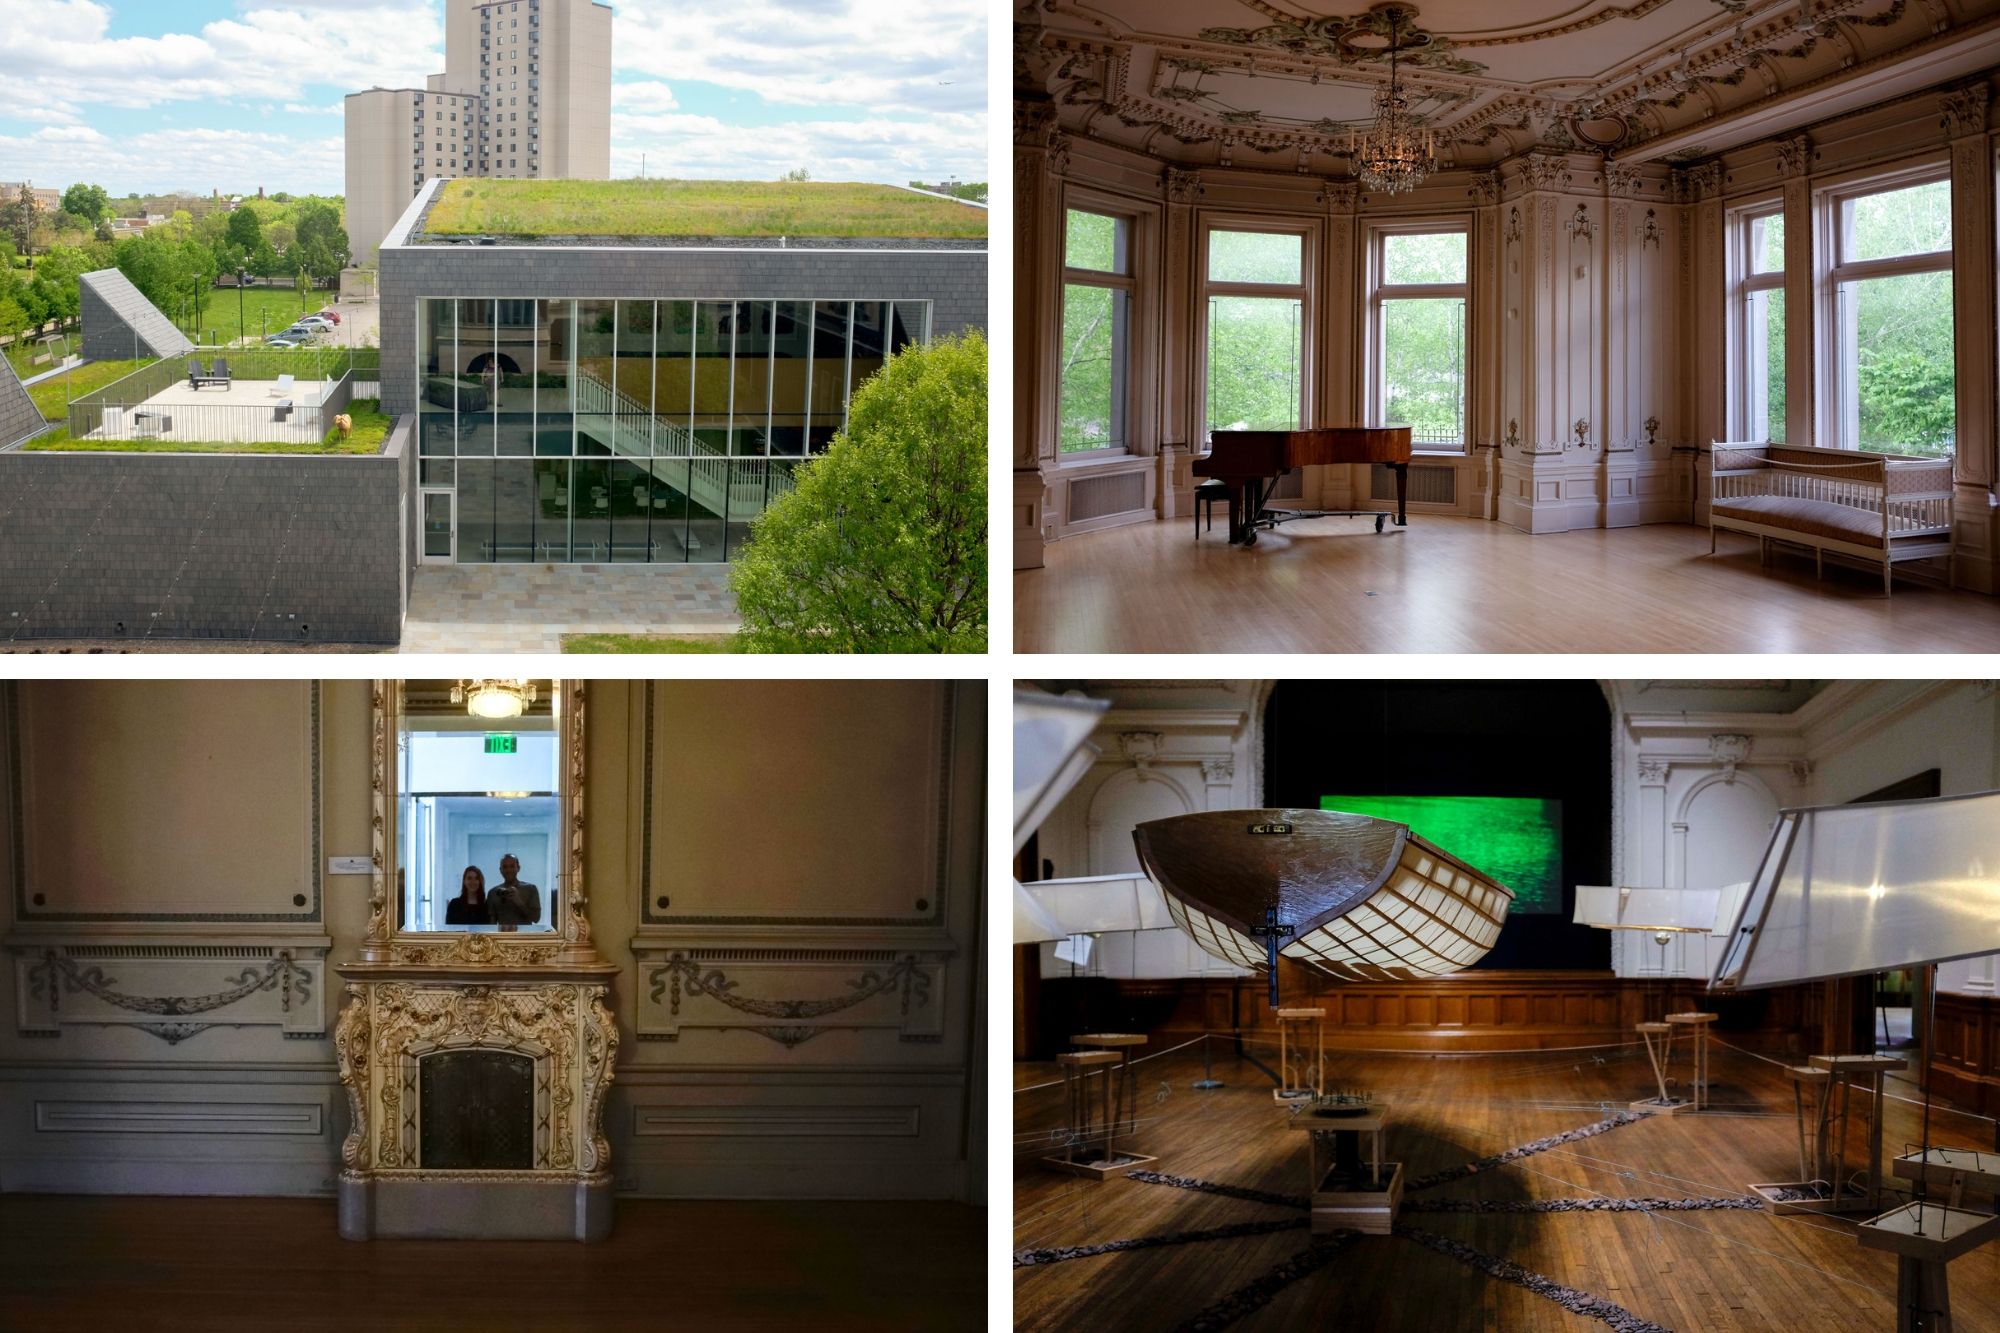 Collage of rooms in the American Swedish Institute